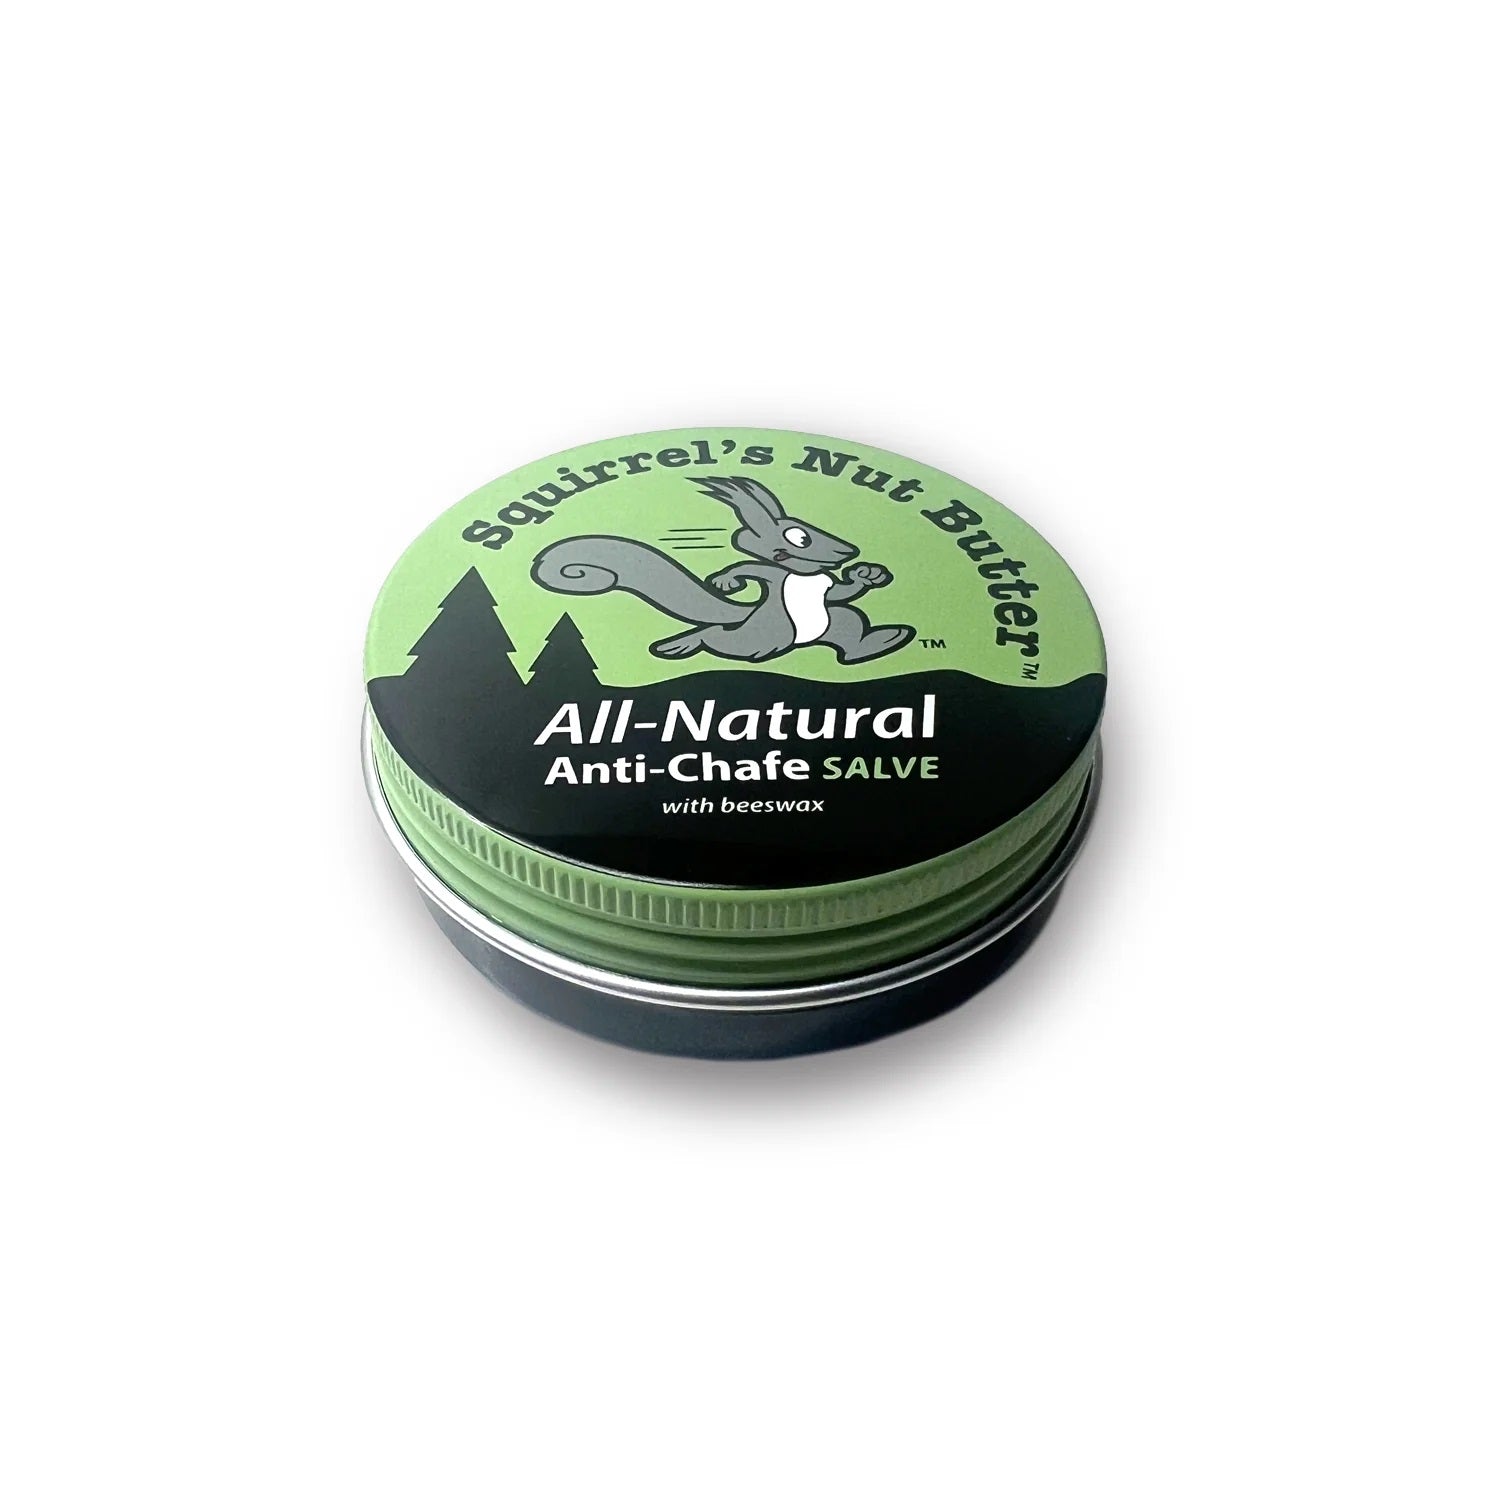 Squirrel's Nut Butter All Natural Anti-Chafe Salve Tub 57Mml Tin